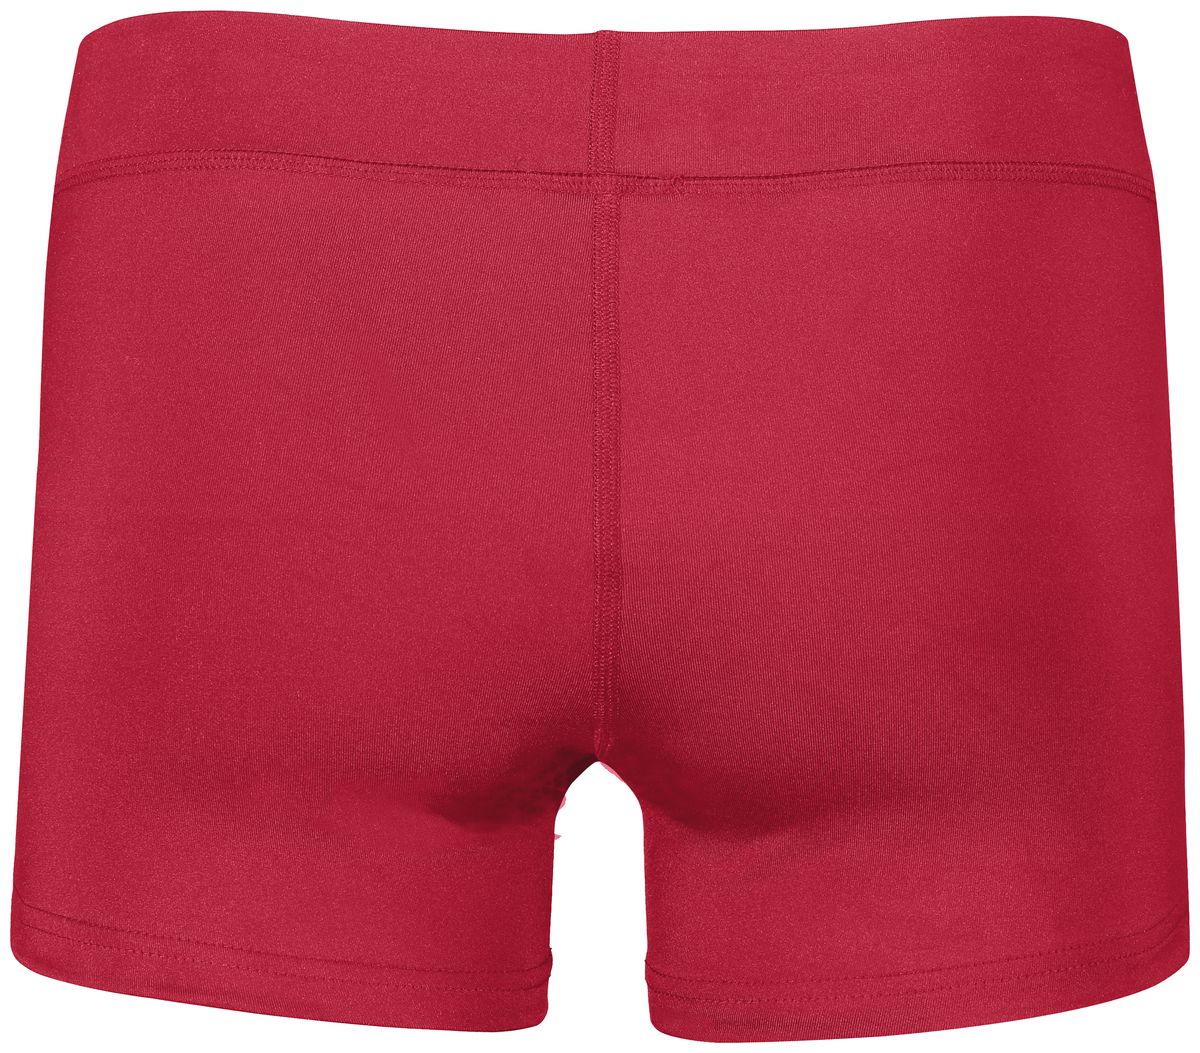 Augusta Women's TruHit Volleyball Shorts - image 2 of 5